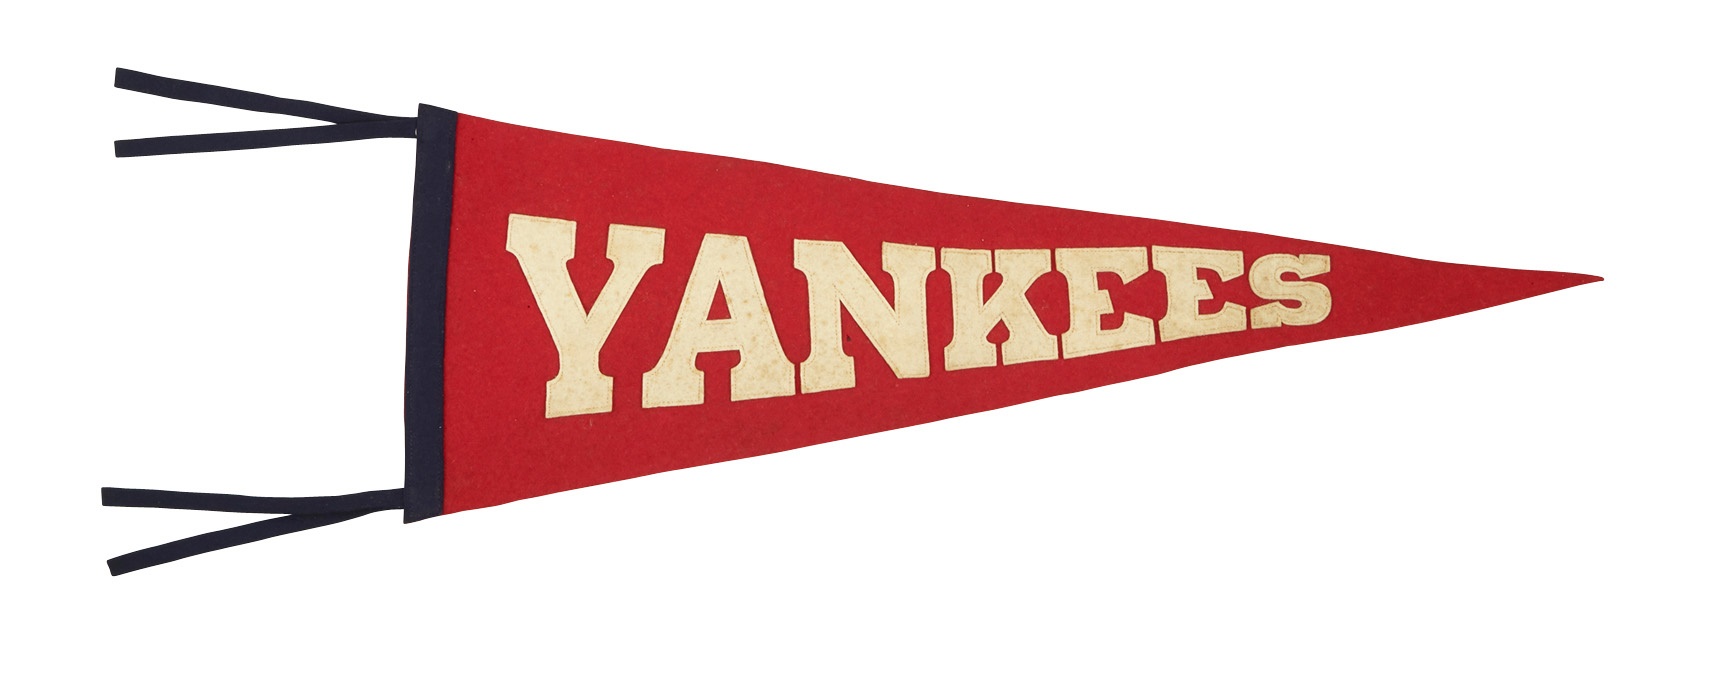 Baseball Memorabilia - Extremely Early New York Yankees Pennant With Sewn-On Letters